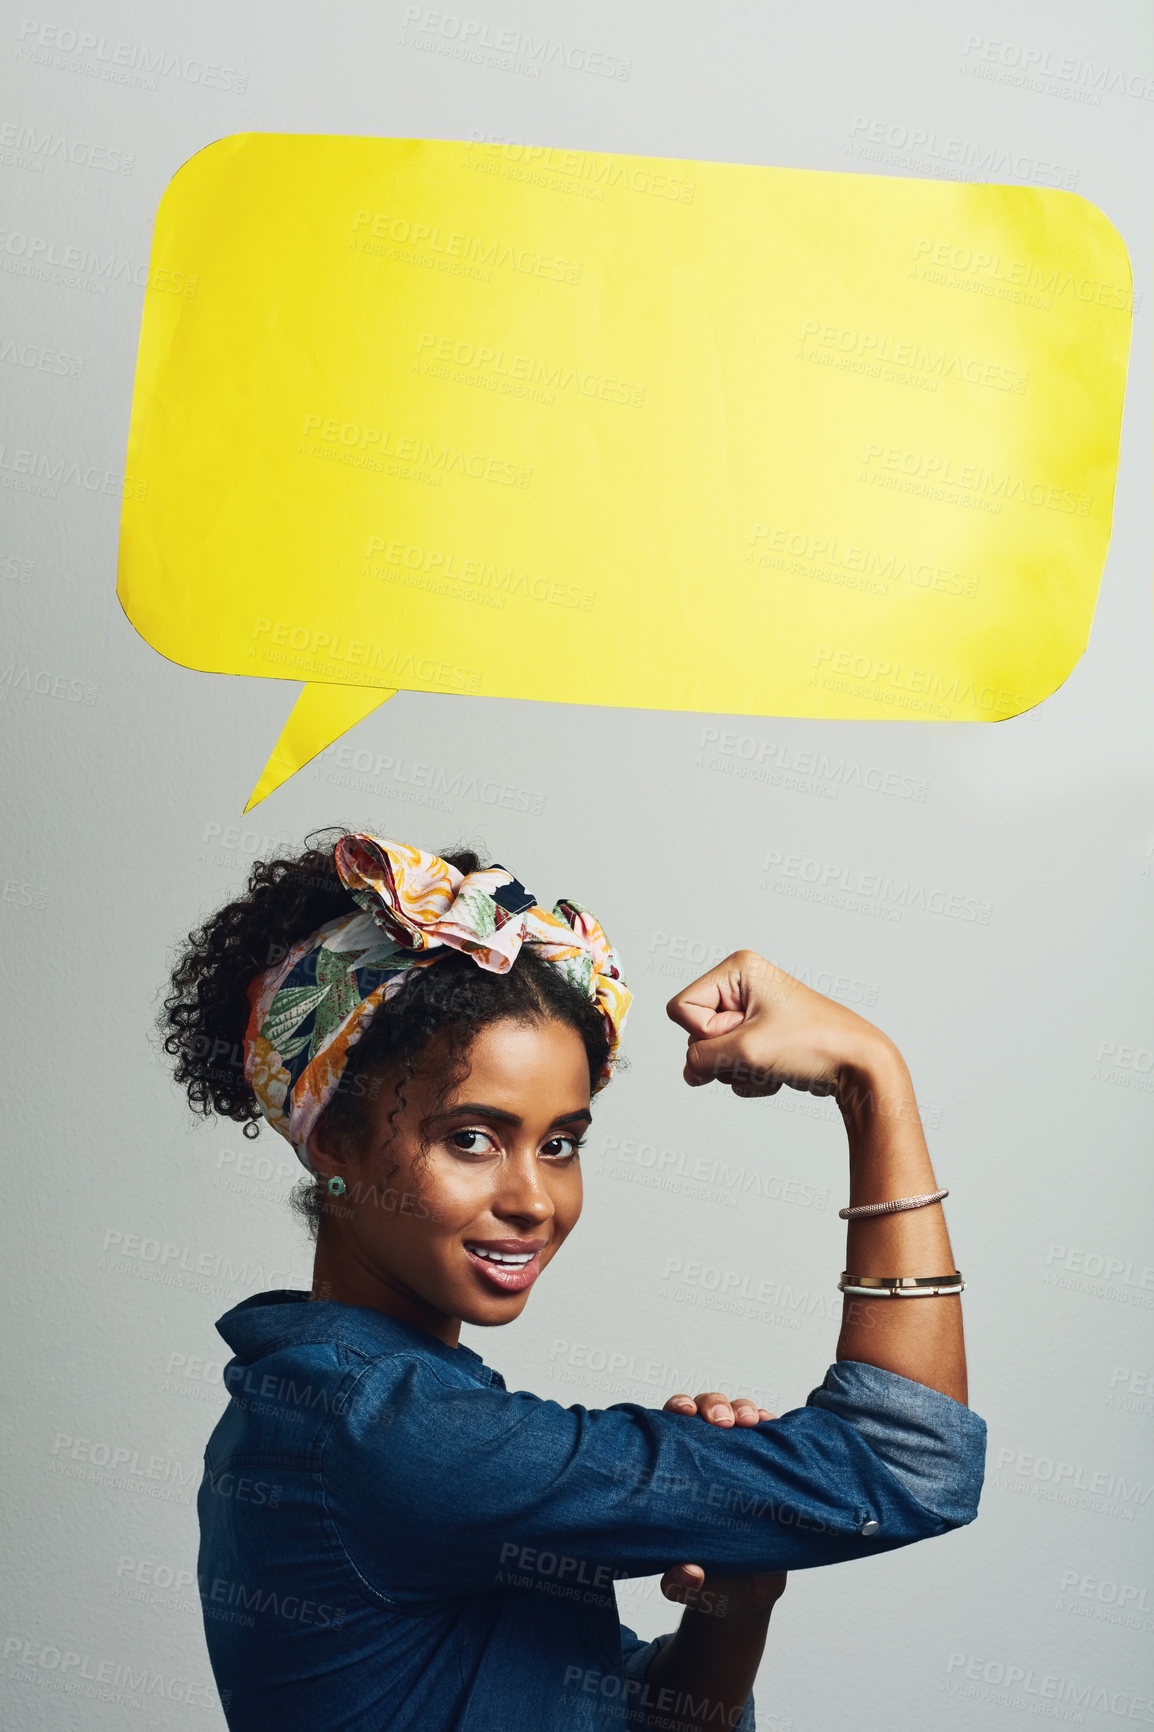 Buy stock photo Studio shot of an attractive young woman posing with a speech bubble against a grey background